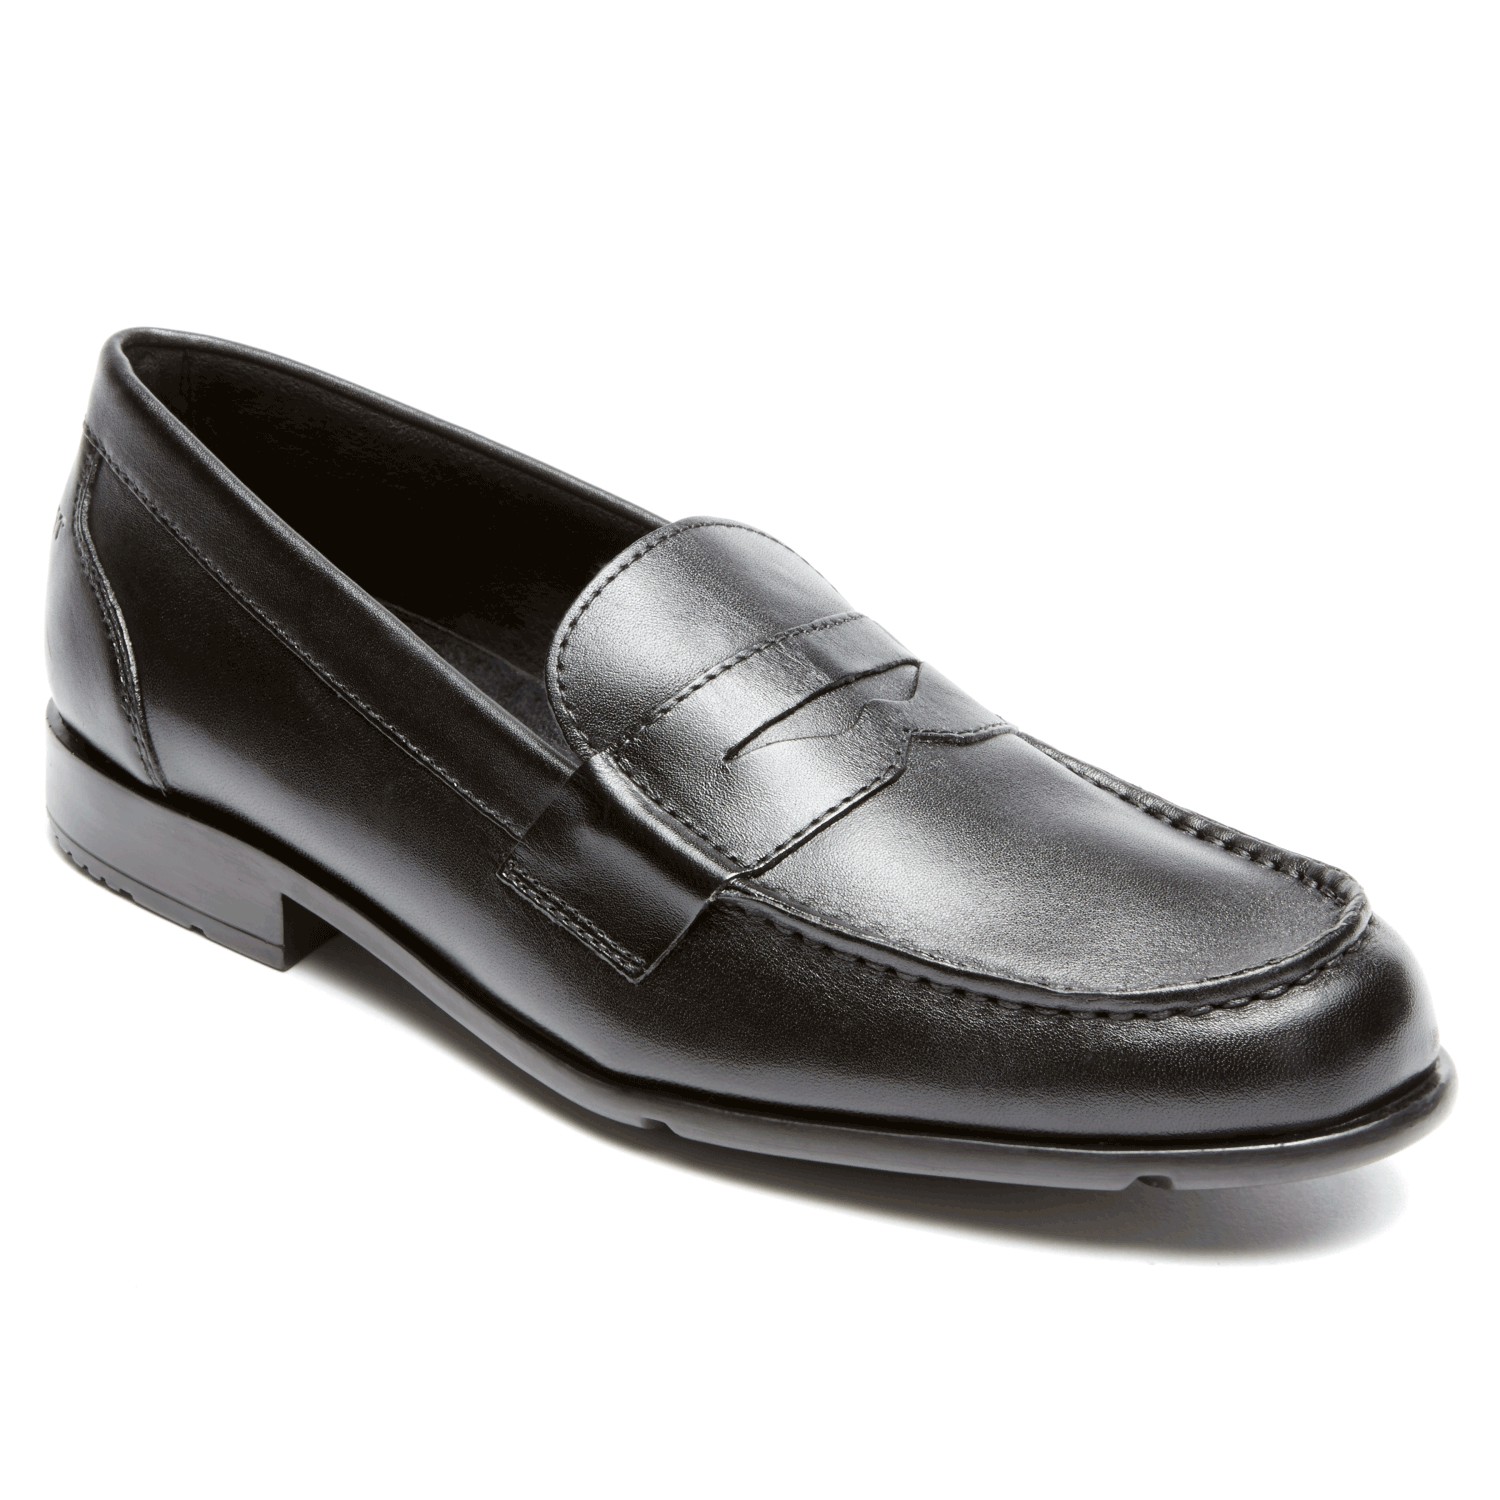 dress shoes extra wide